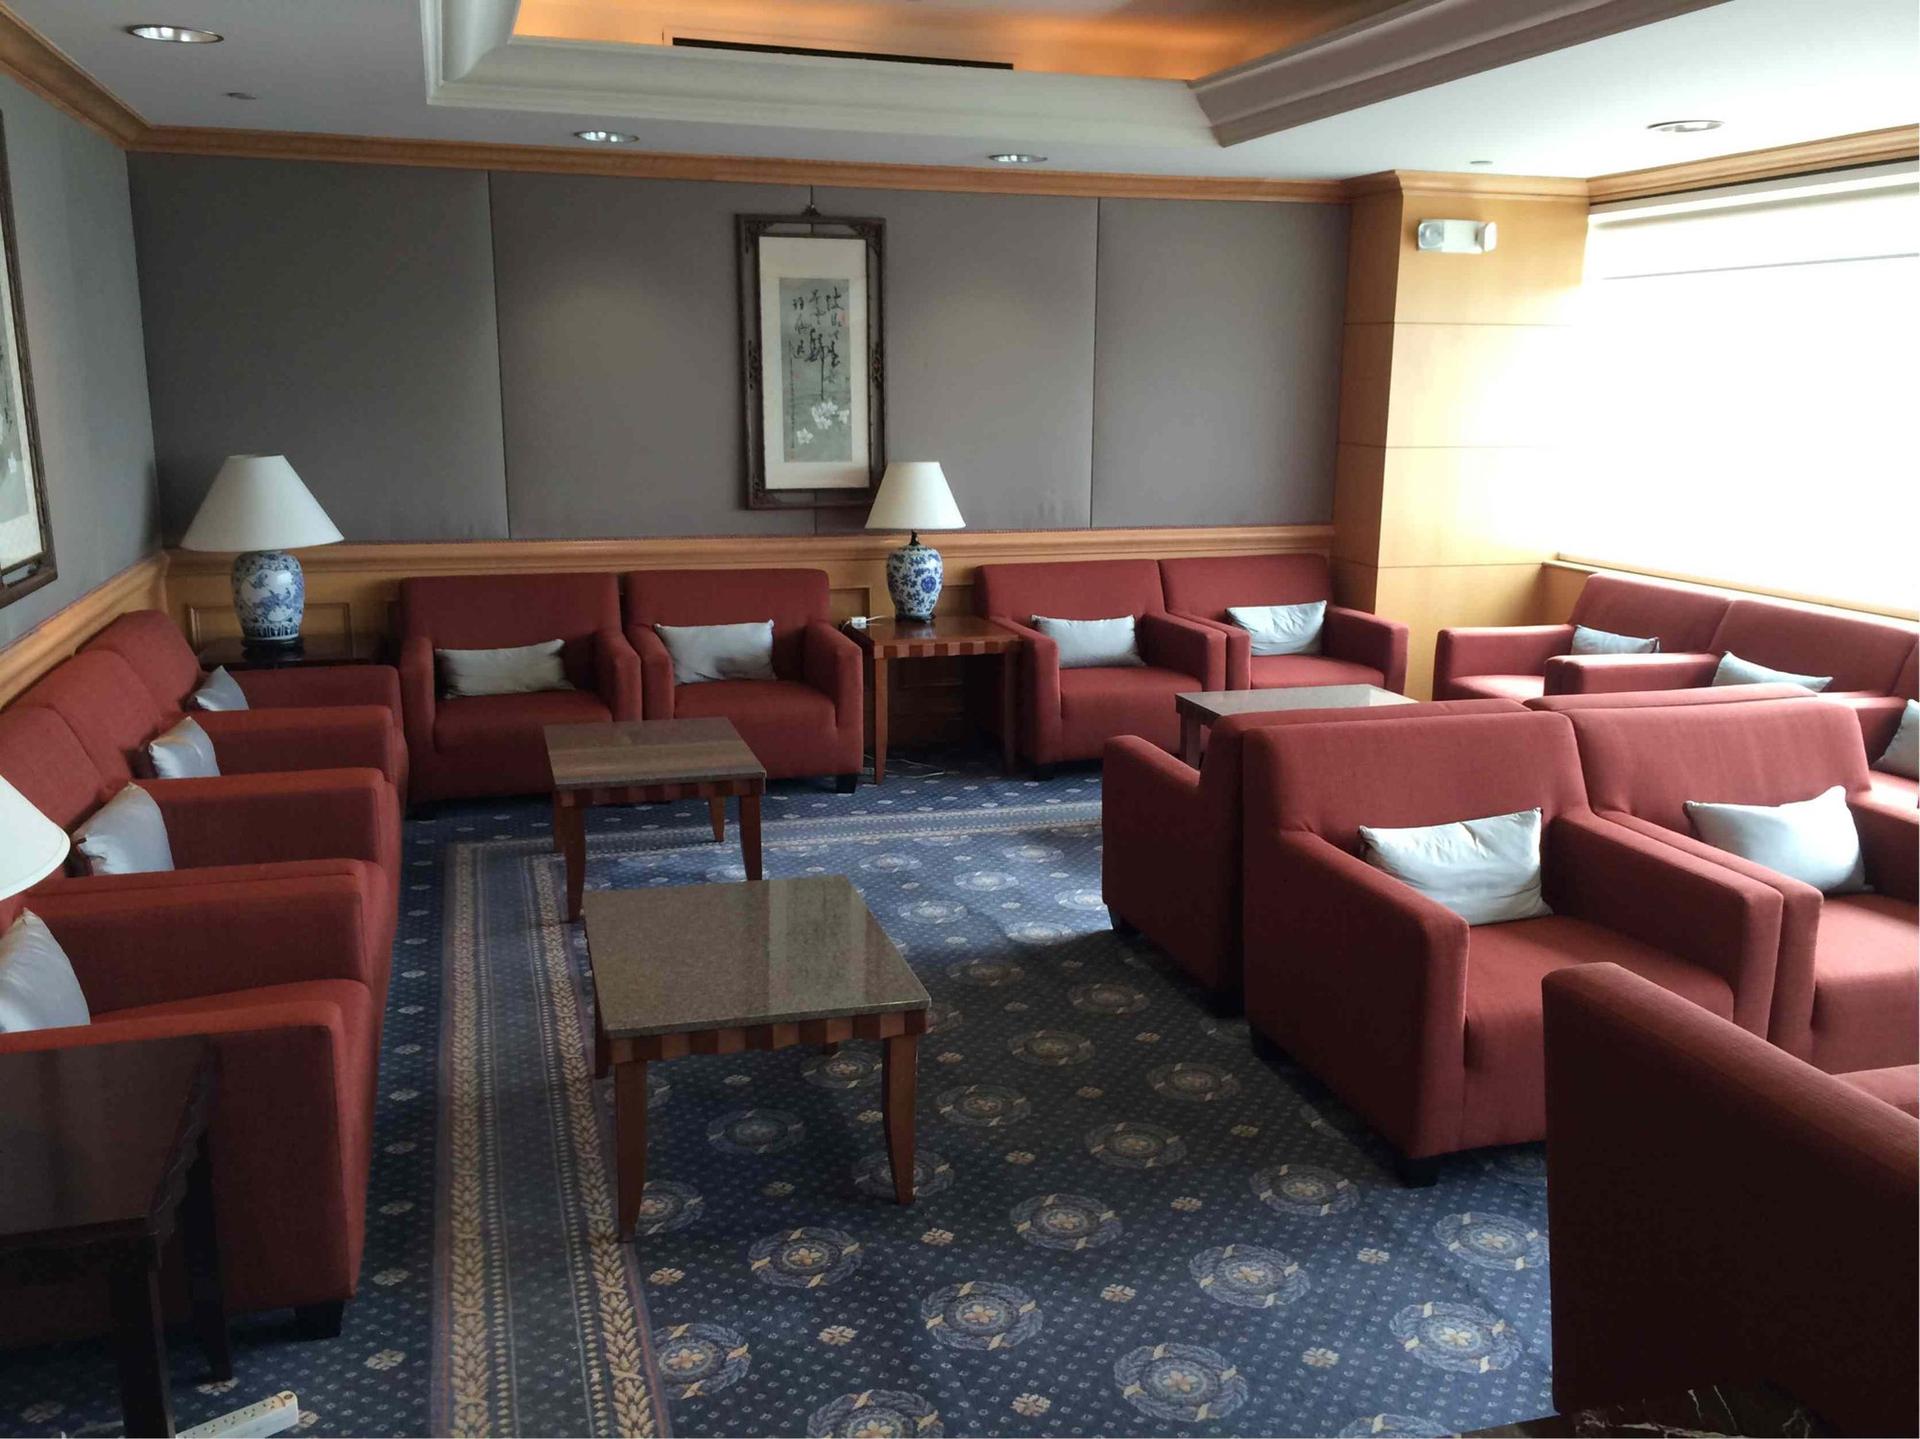 China Airlines Dynasty Lounge image 8 of 34